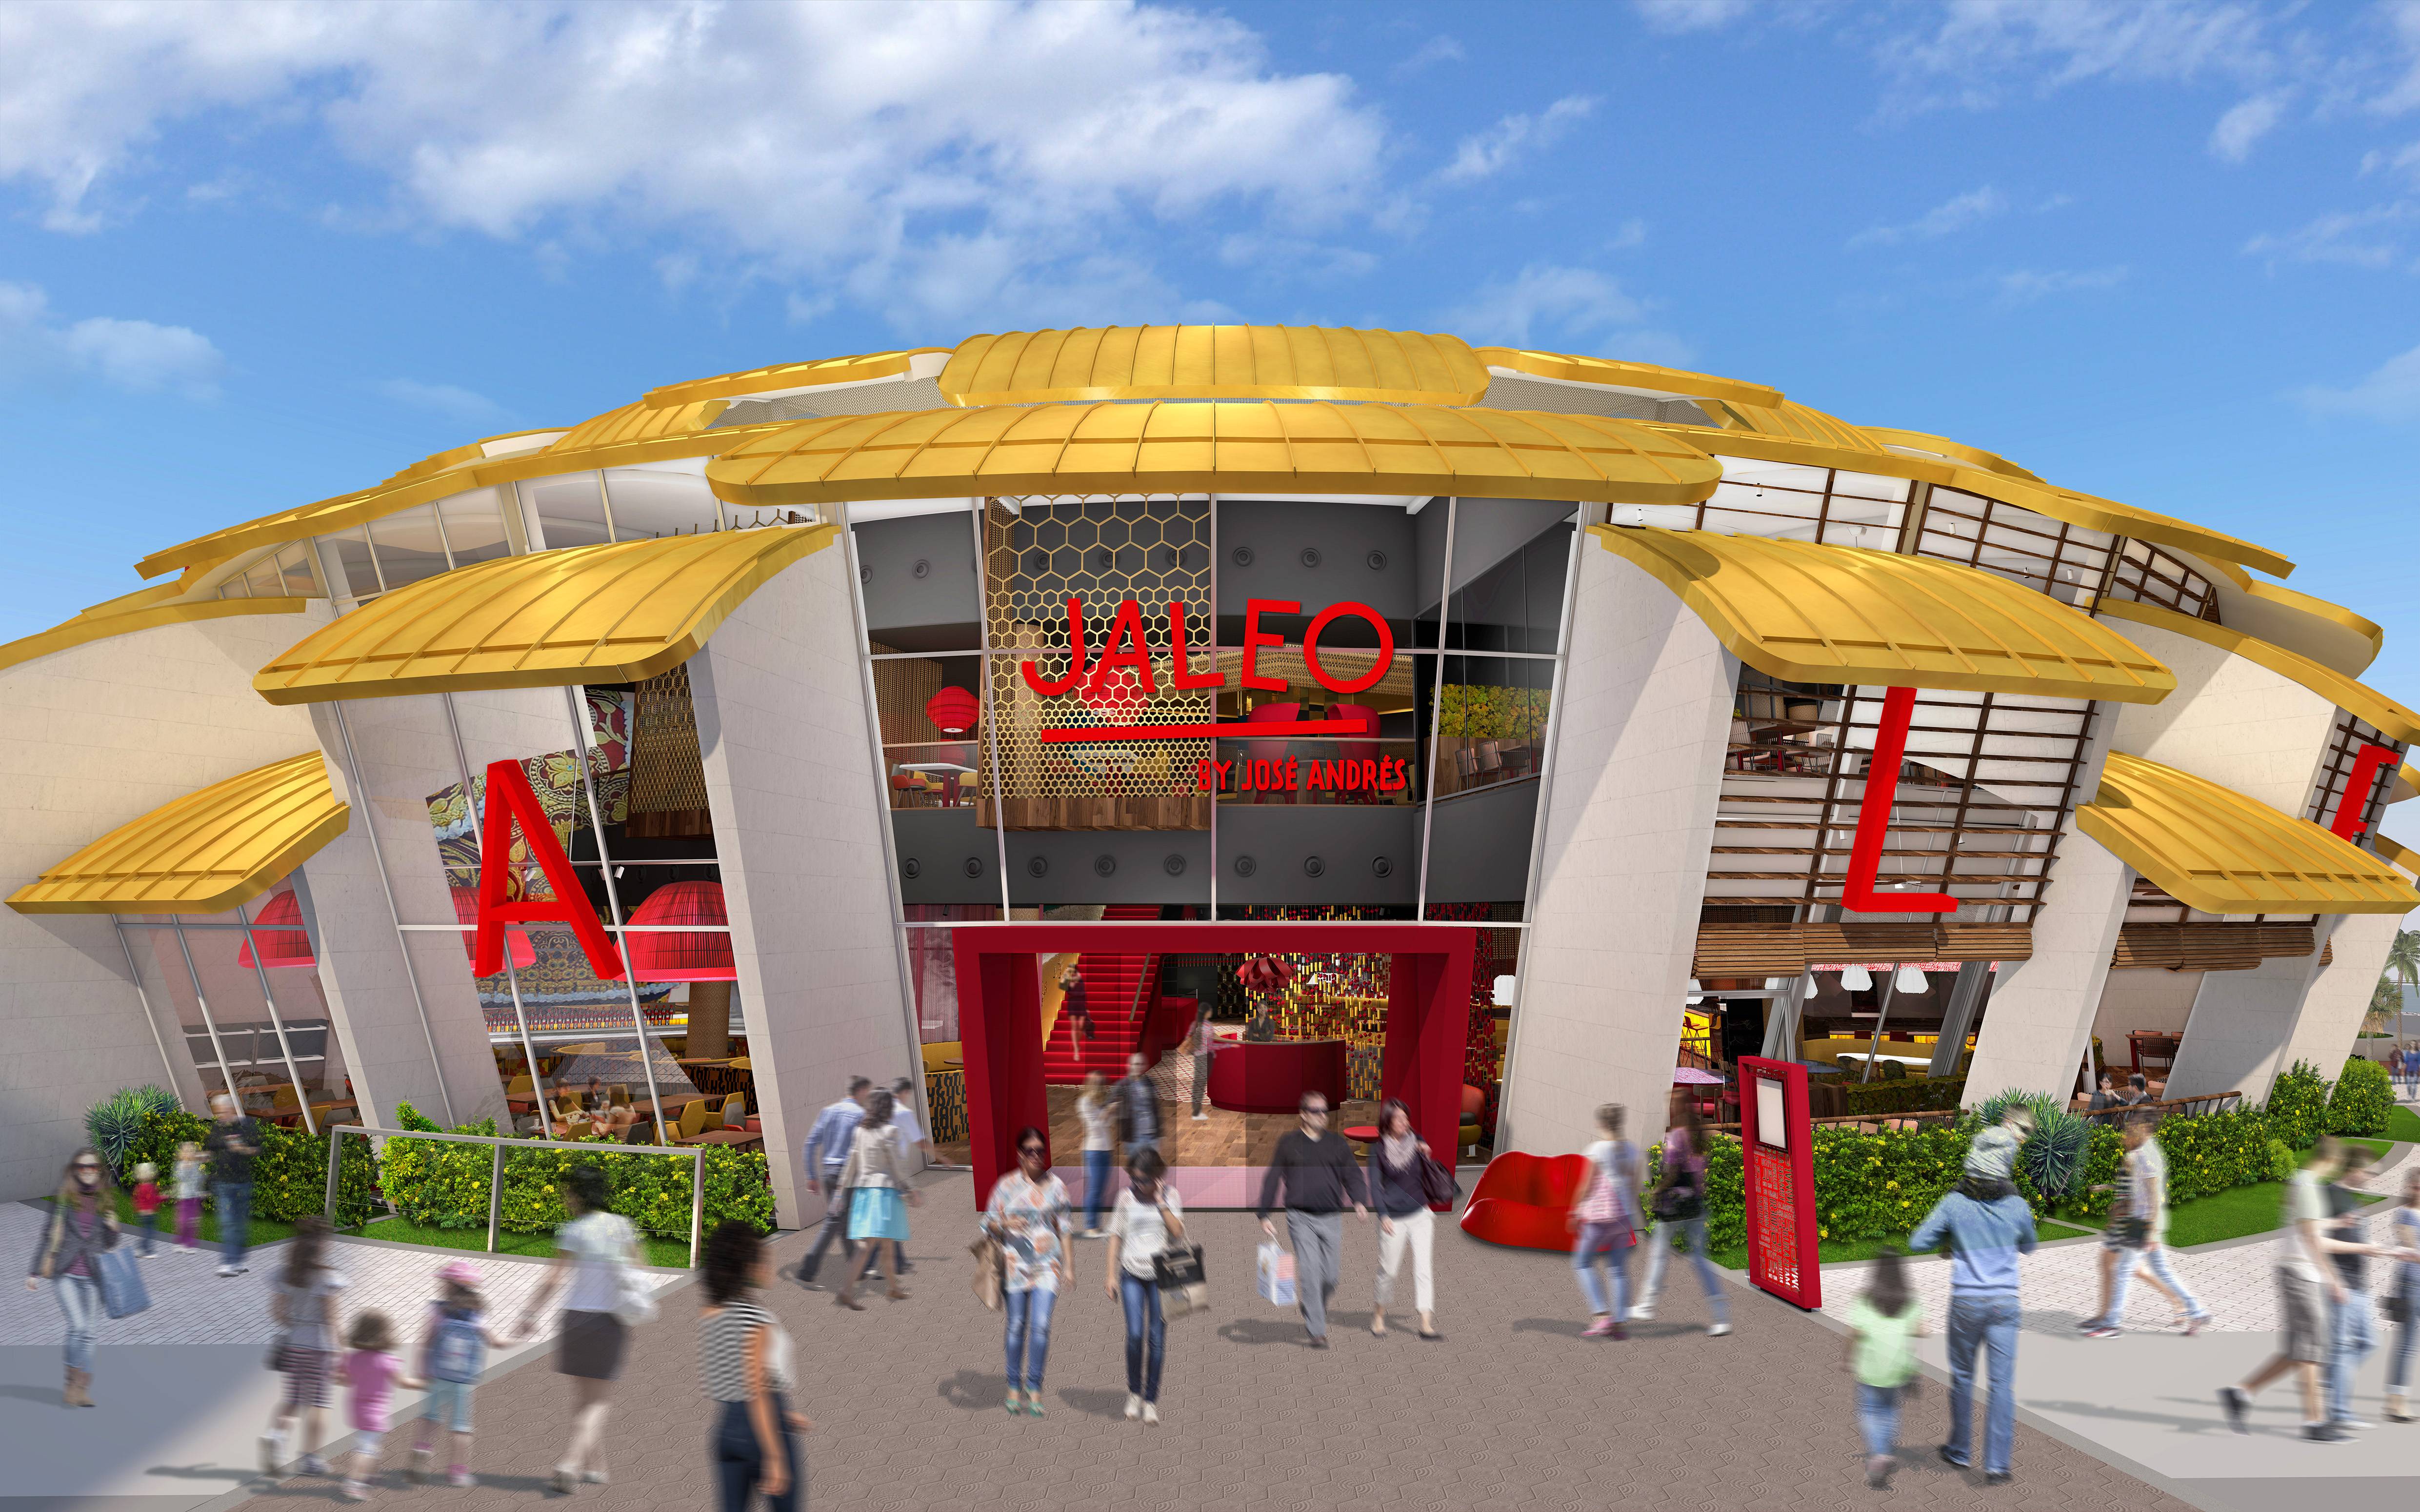 PHOTOS - New renderings and details for the upcoming Jaleo at Disney Springs